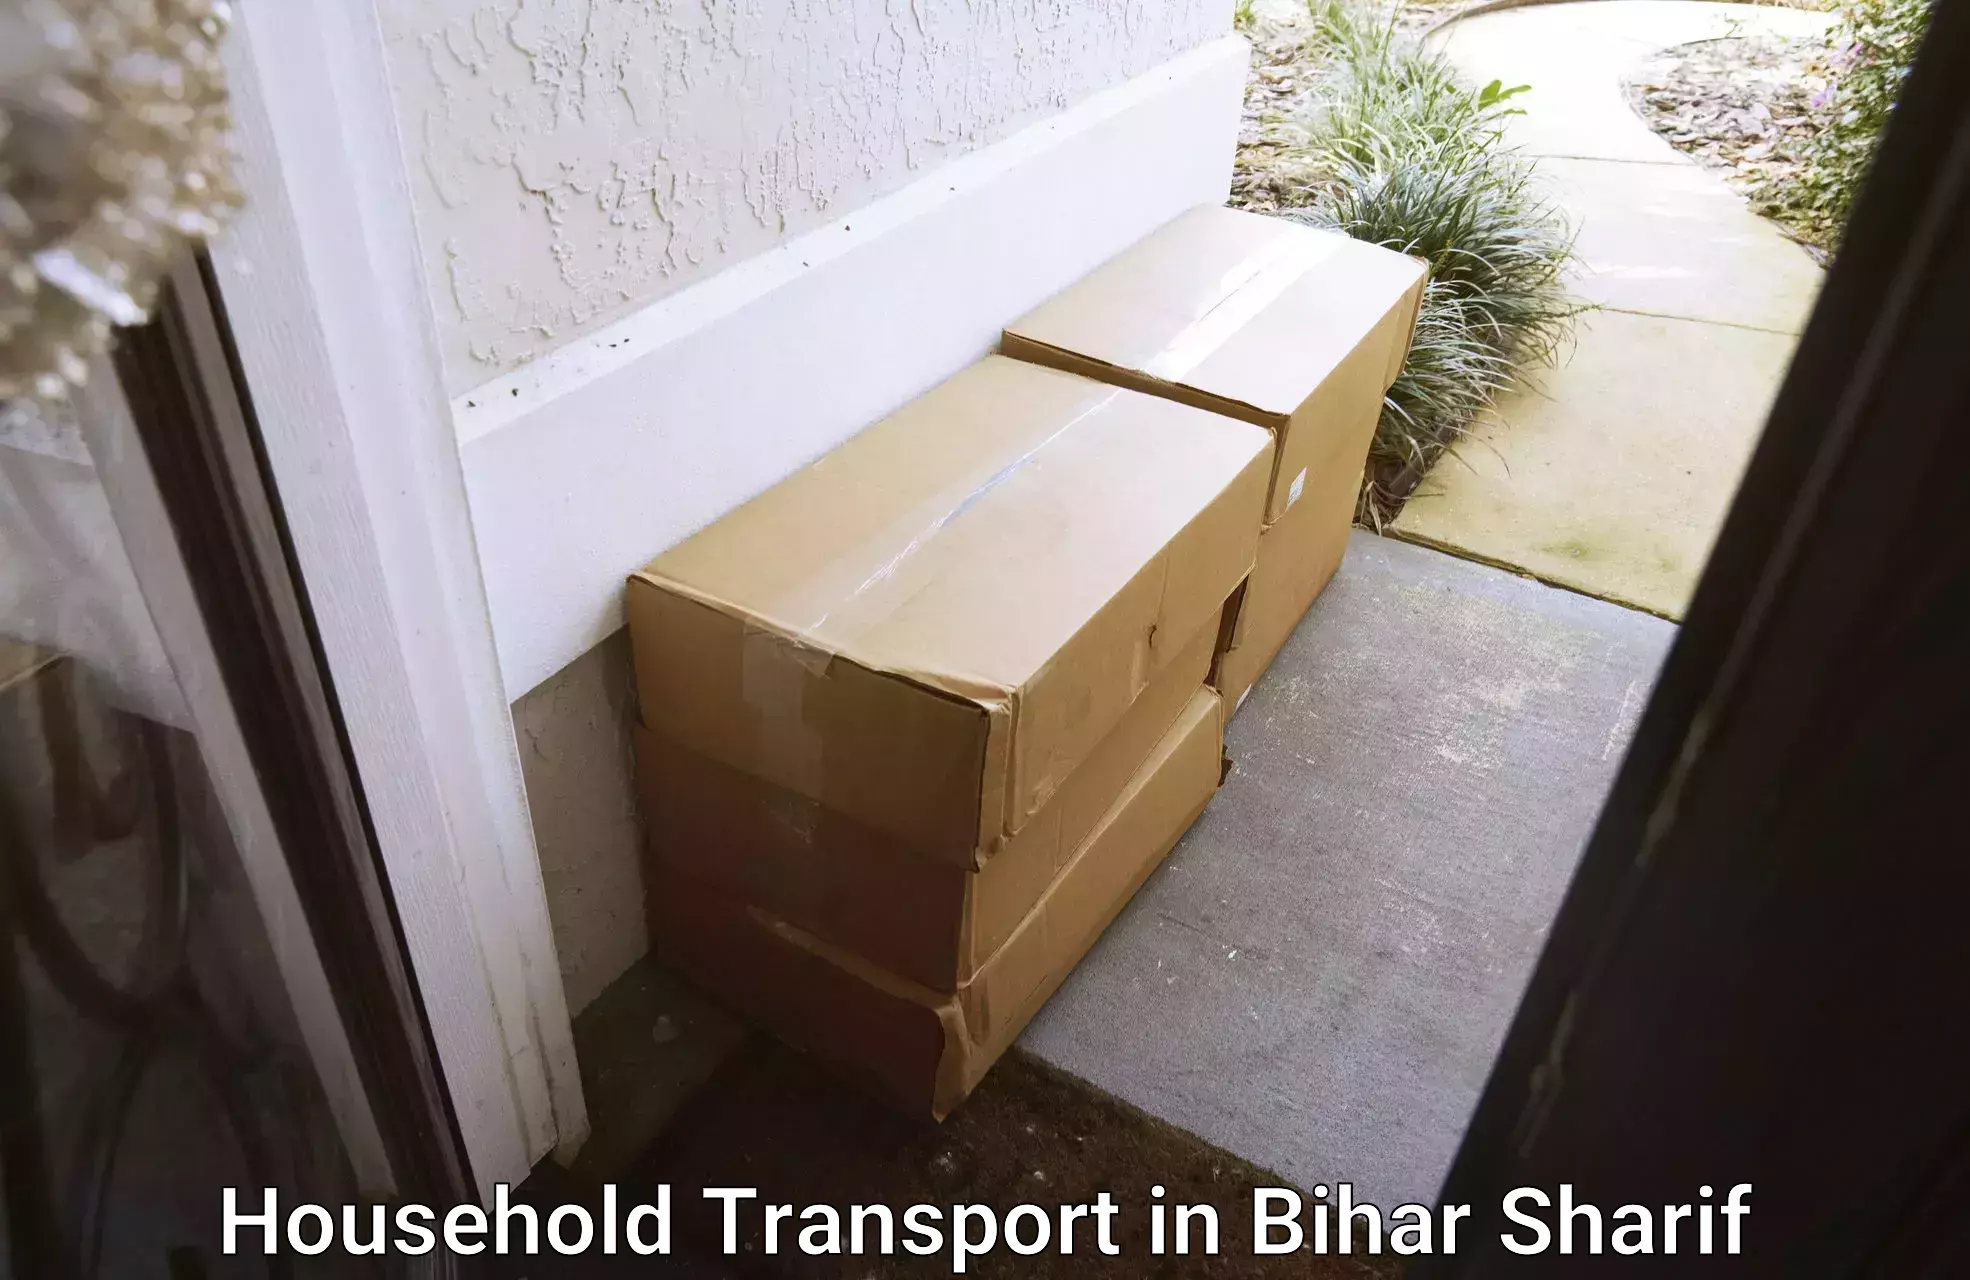 Reliable movers in Bihar Sharif